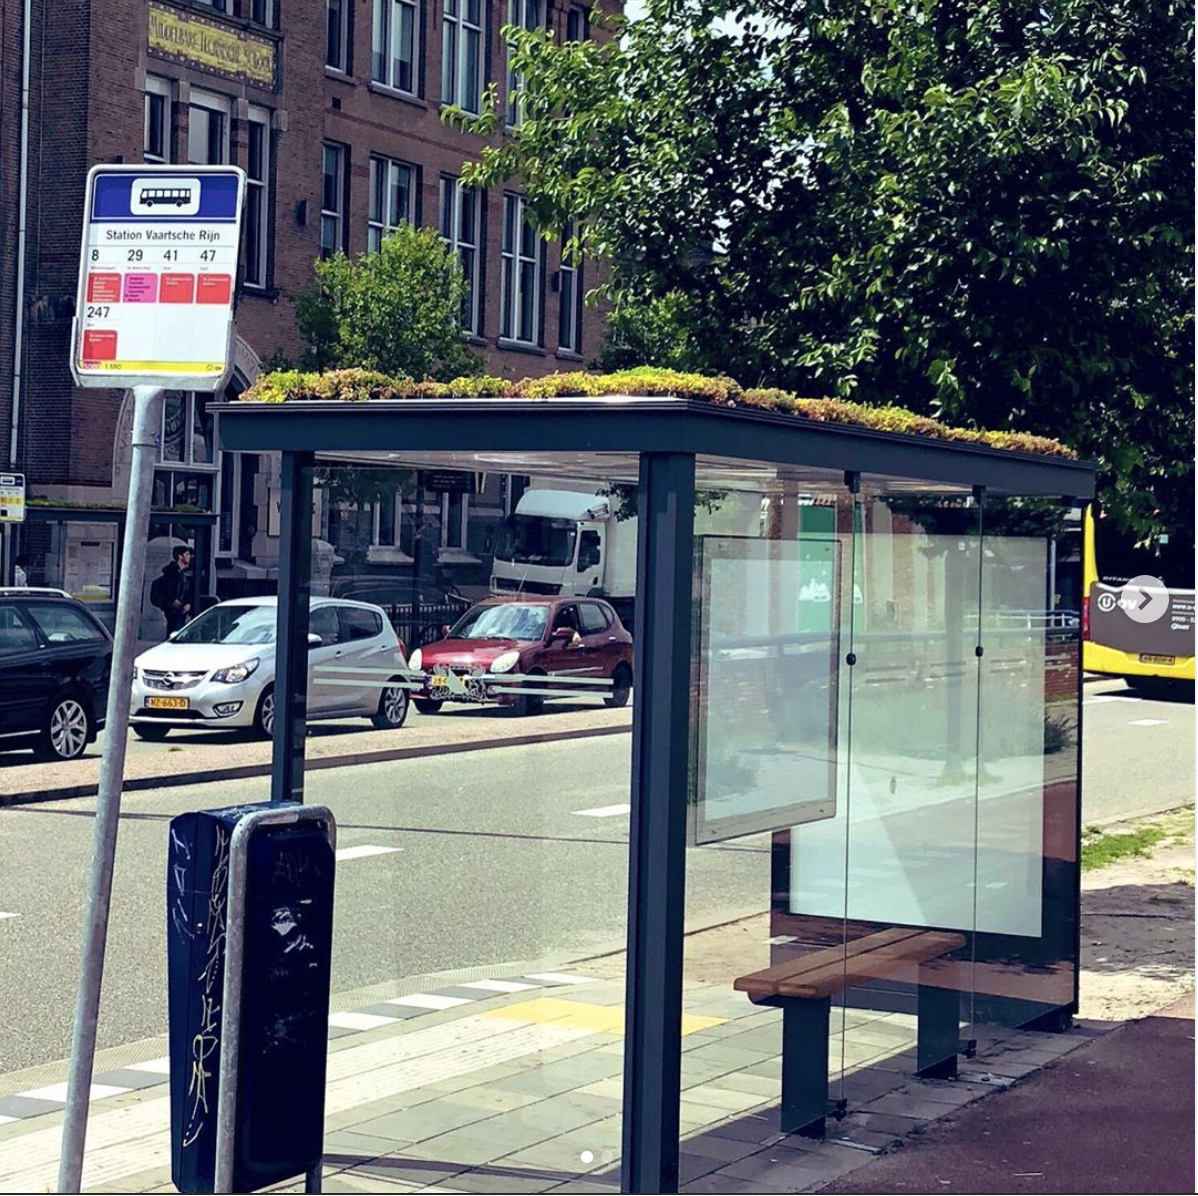 Read more about the article Netherlands Bus Stops Turning into Honey Bees Hives or “Bees Stops”